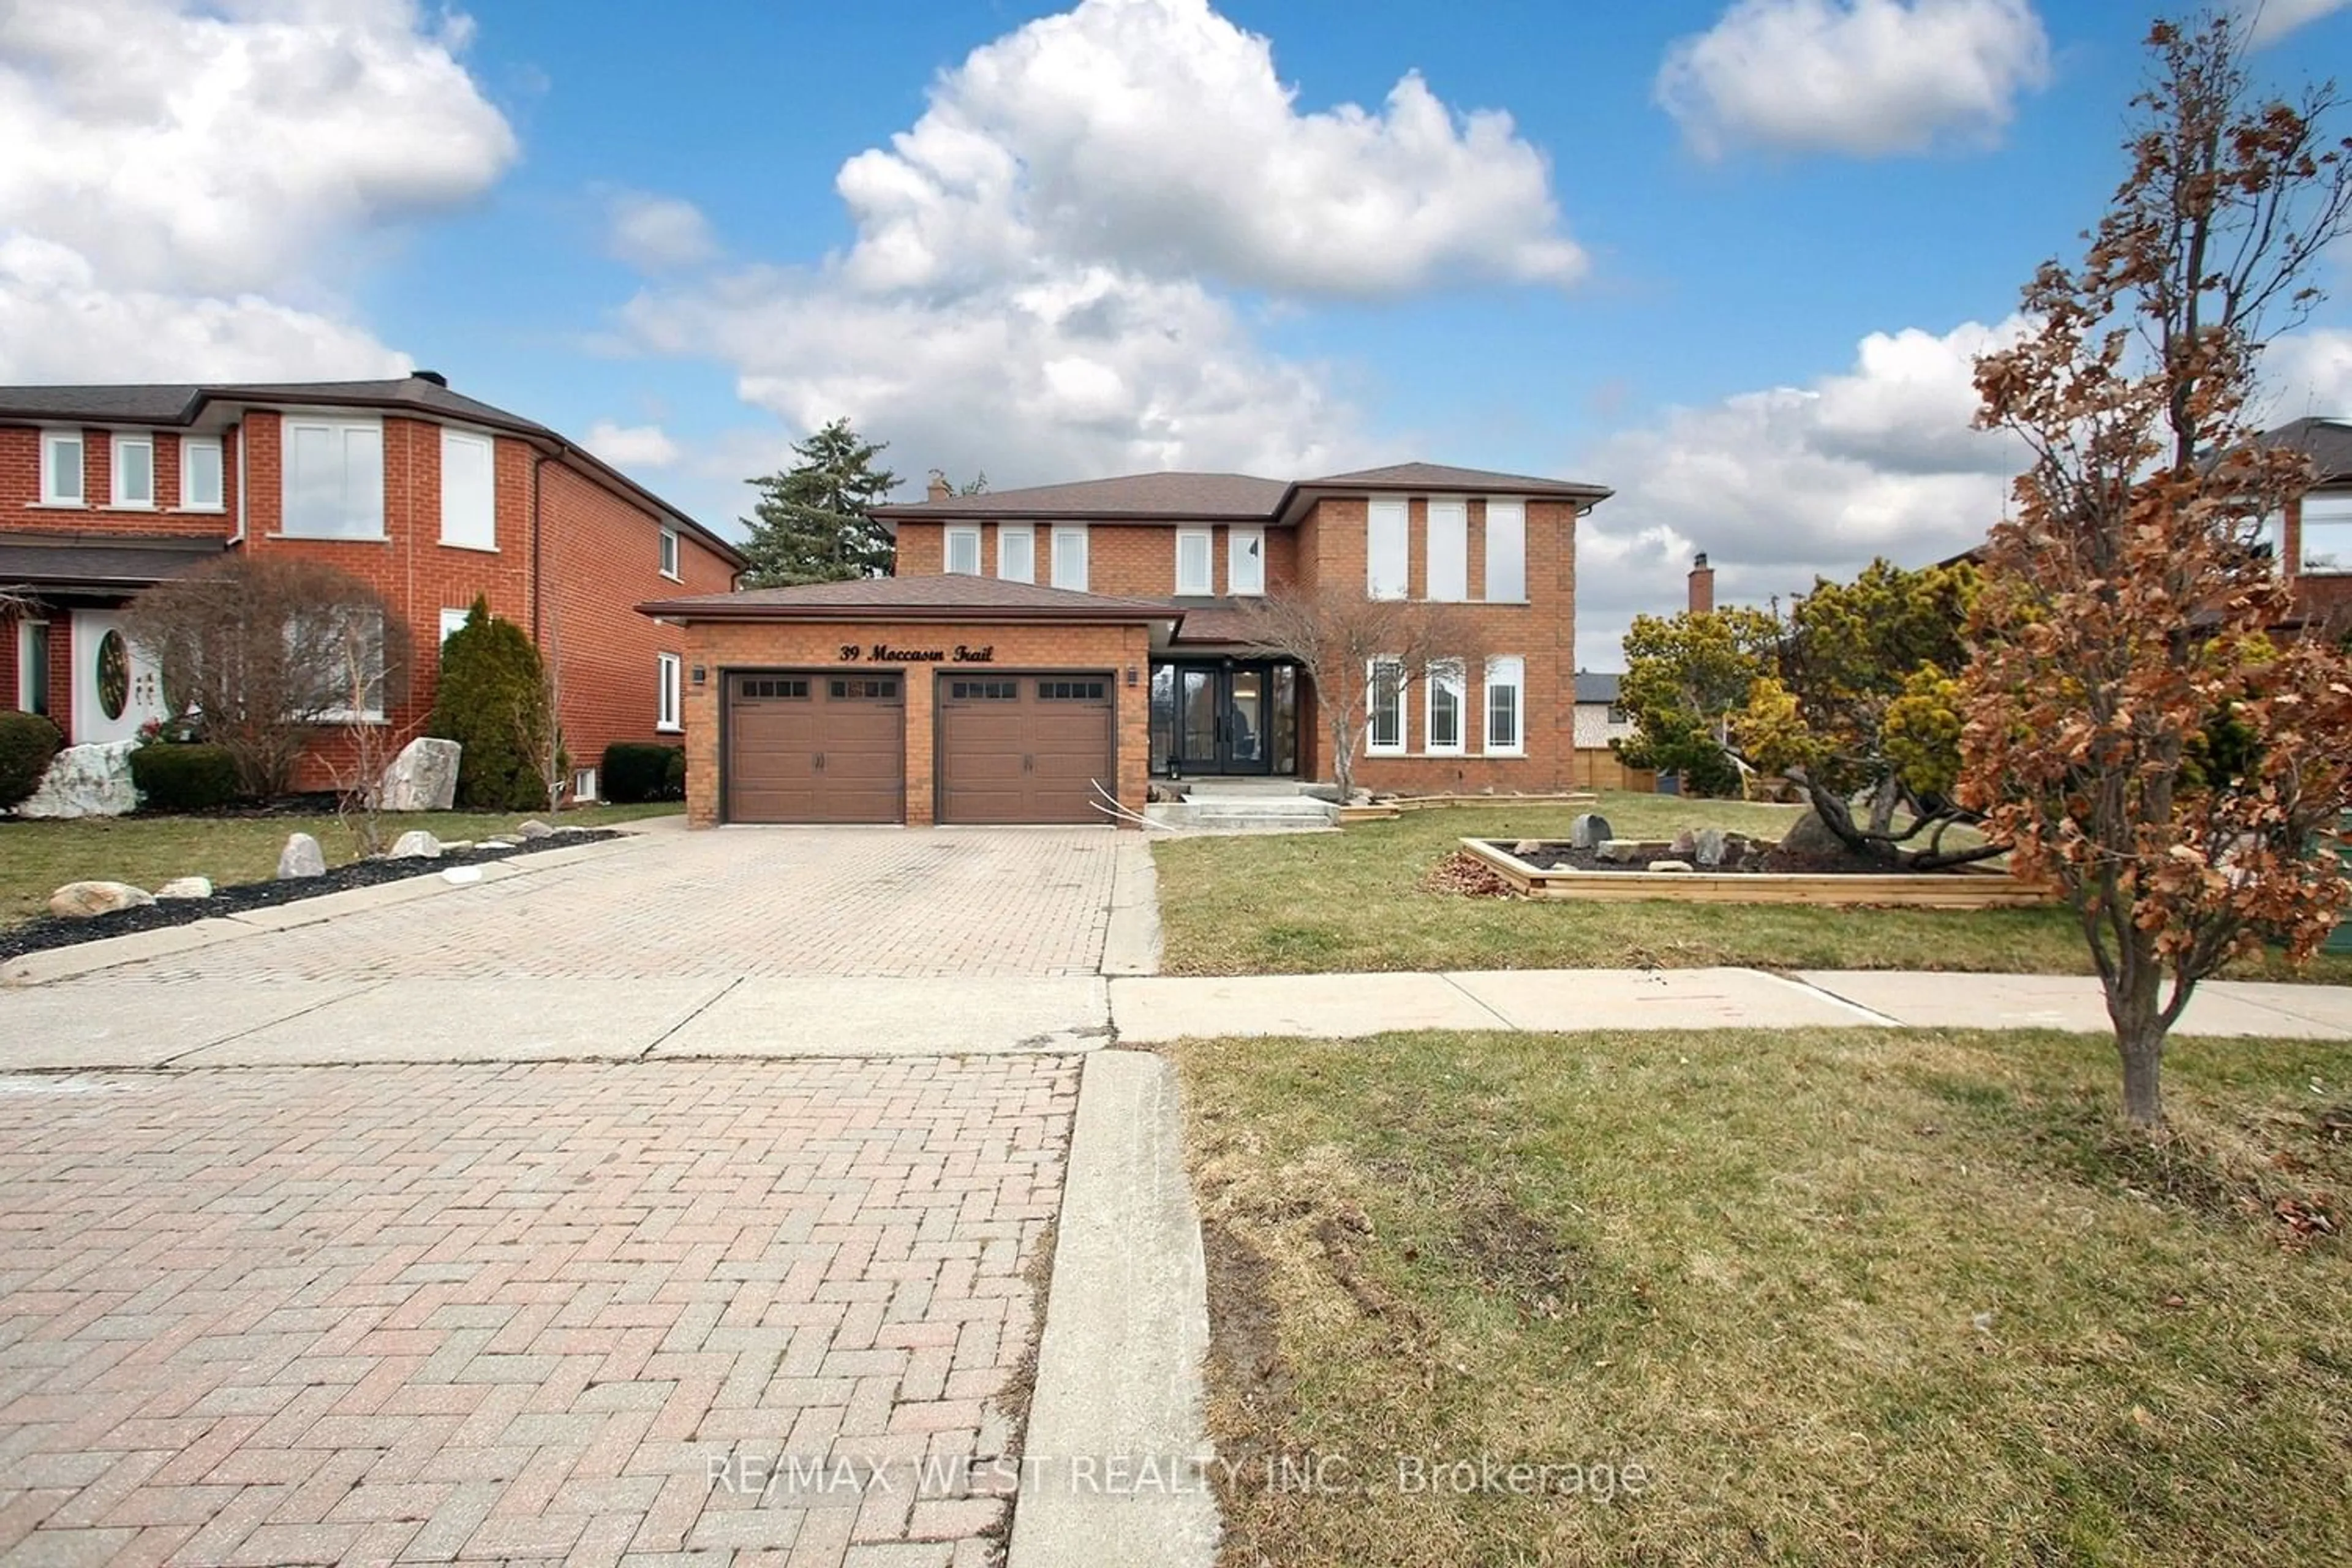 Home with brick exterior material for 39 Moccasin Tr, Vaughan Ontario L4L 7B6